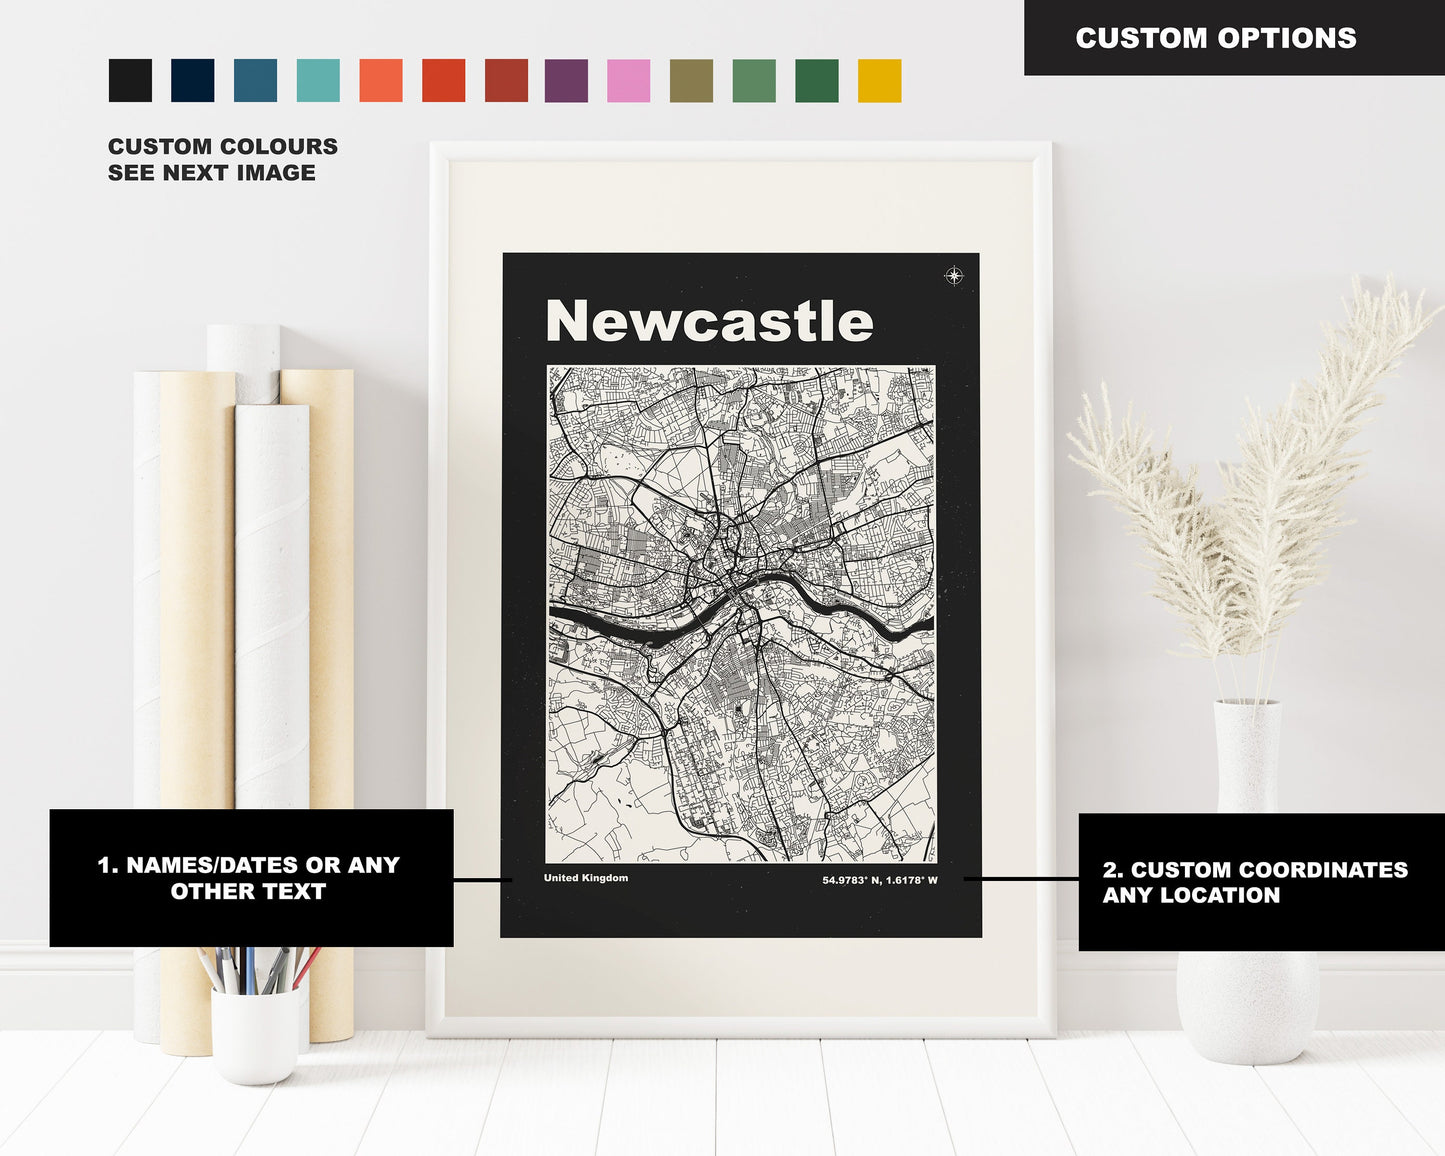 Newcastle Print - Map Print - Mid Century Modern  - Retro - Vintage - Contemporary - Newcastle Print - City Map - City Map Poster - Gift